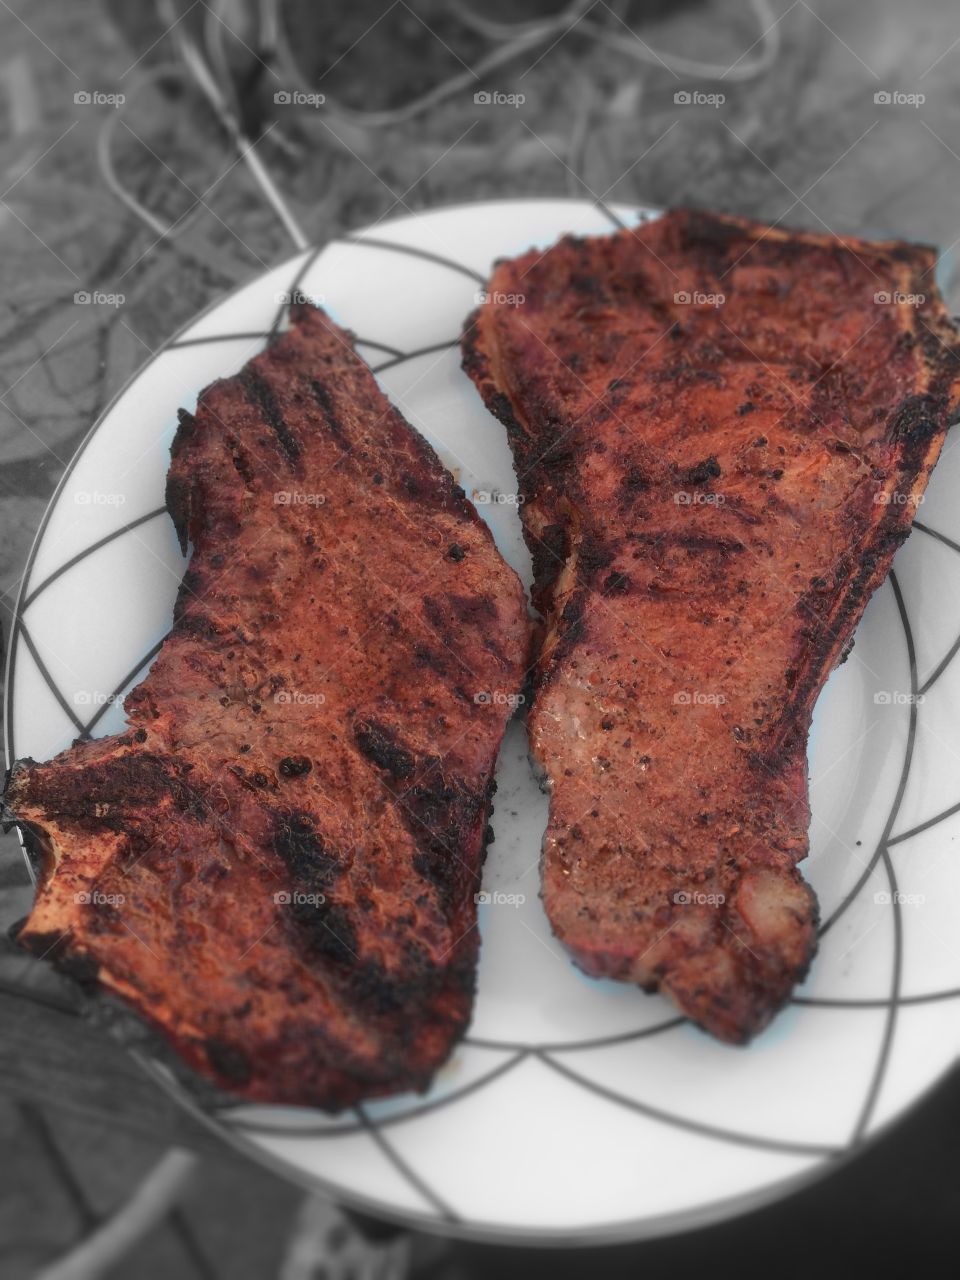 New York strip steak. Dry rubbed and charcoal grilled with cherry wood for a touch of smoke